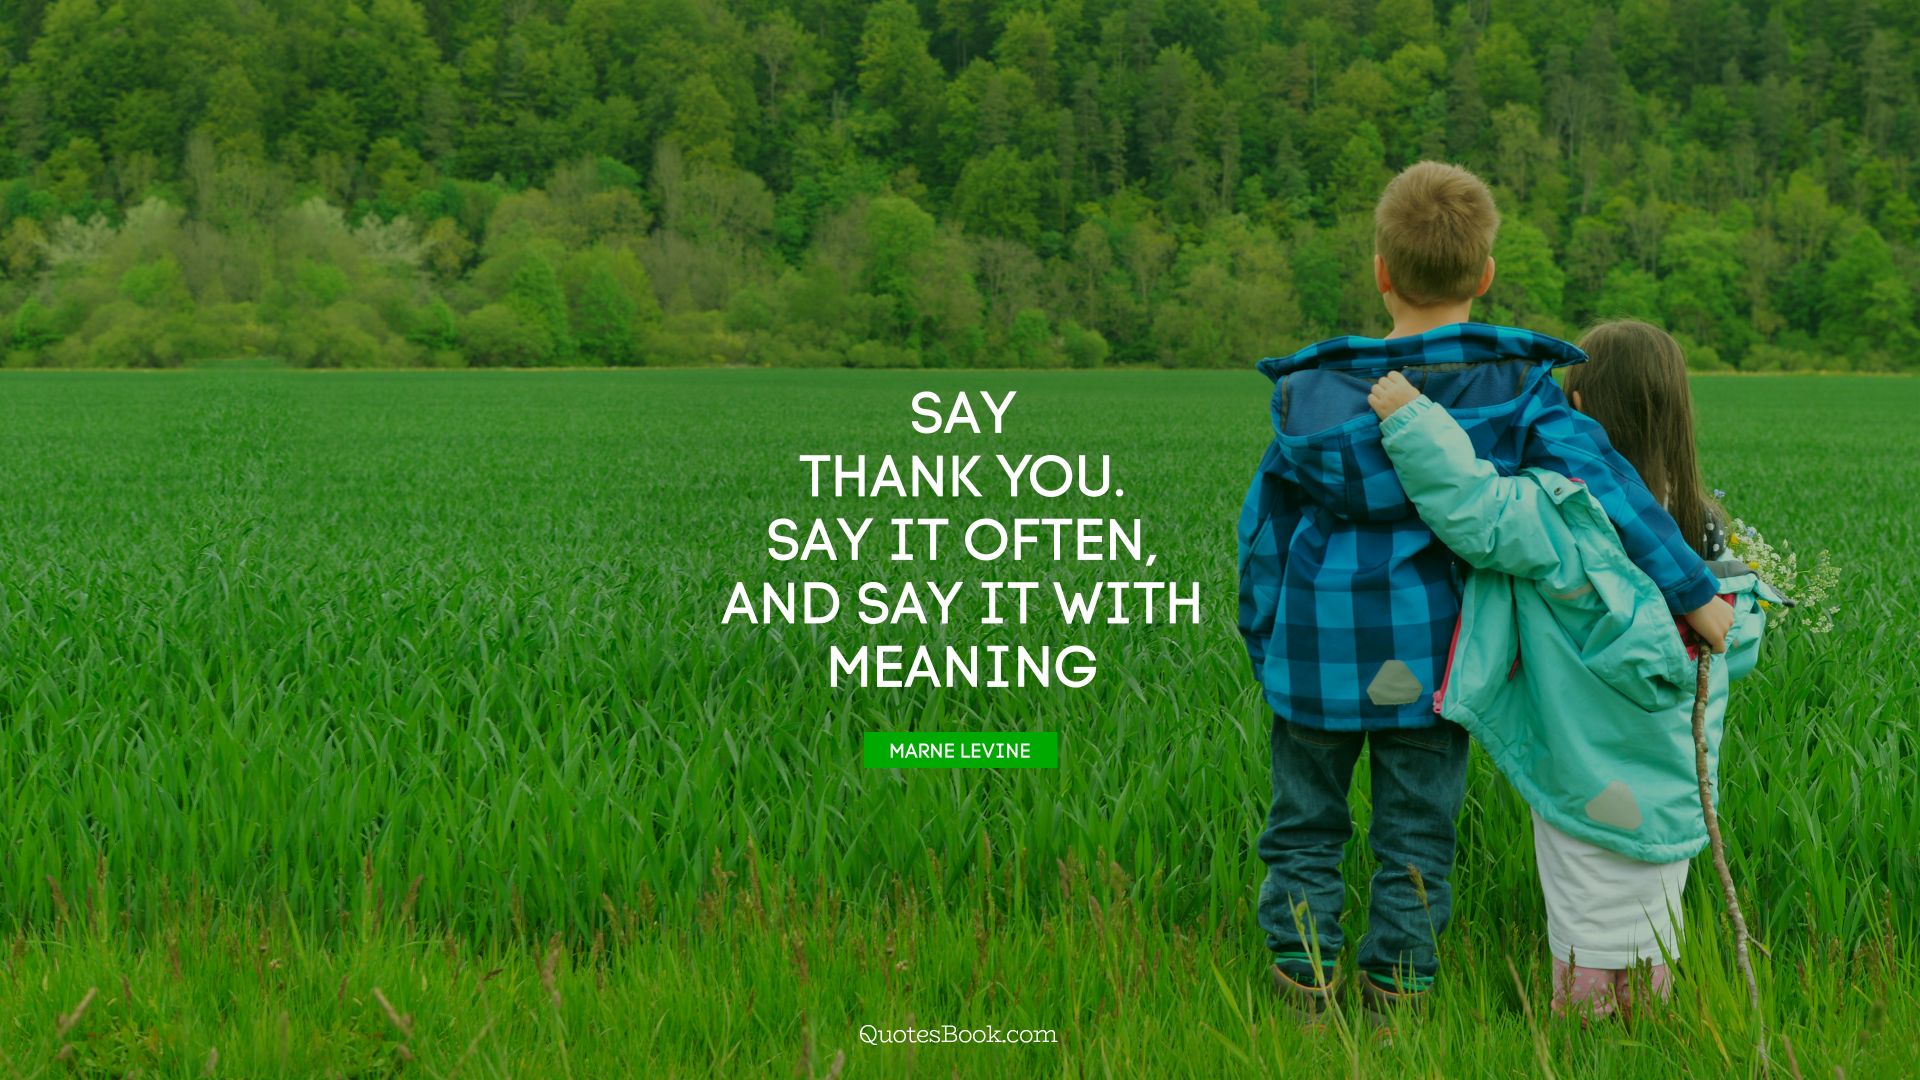 Say thank you. Say it often, and say it with meaning. - Quote by Marne Levine